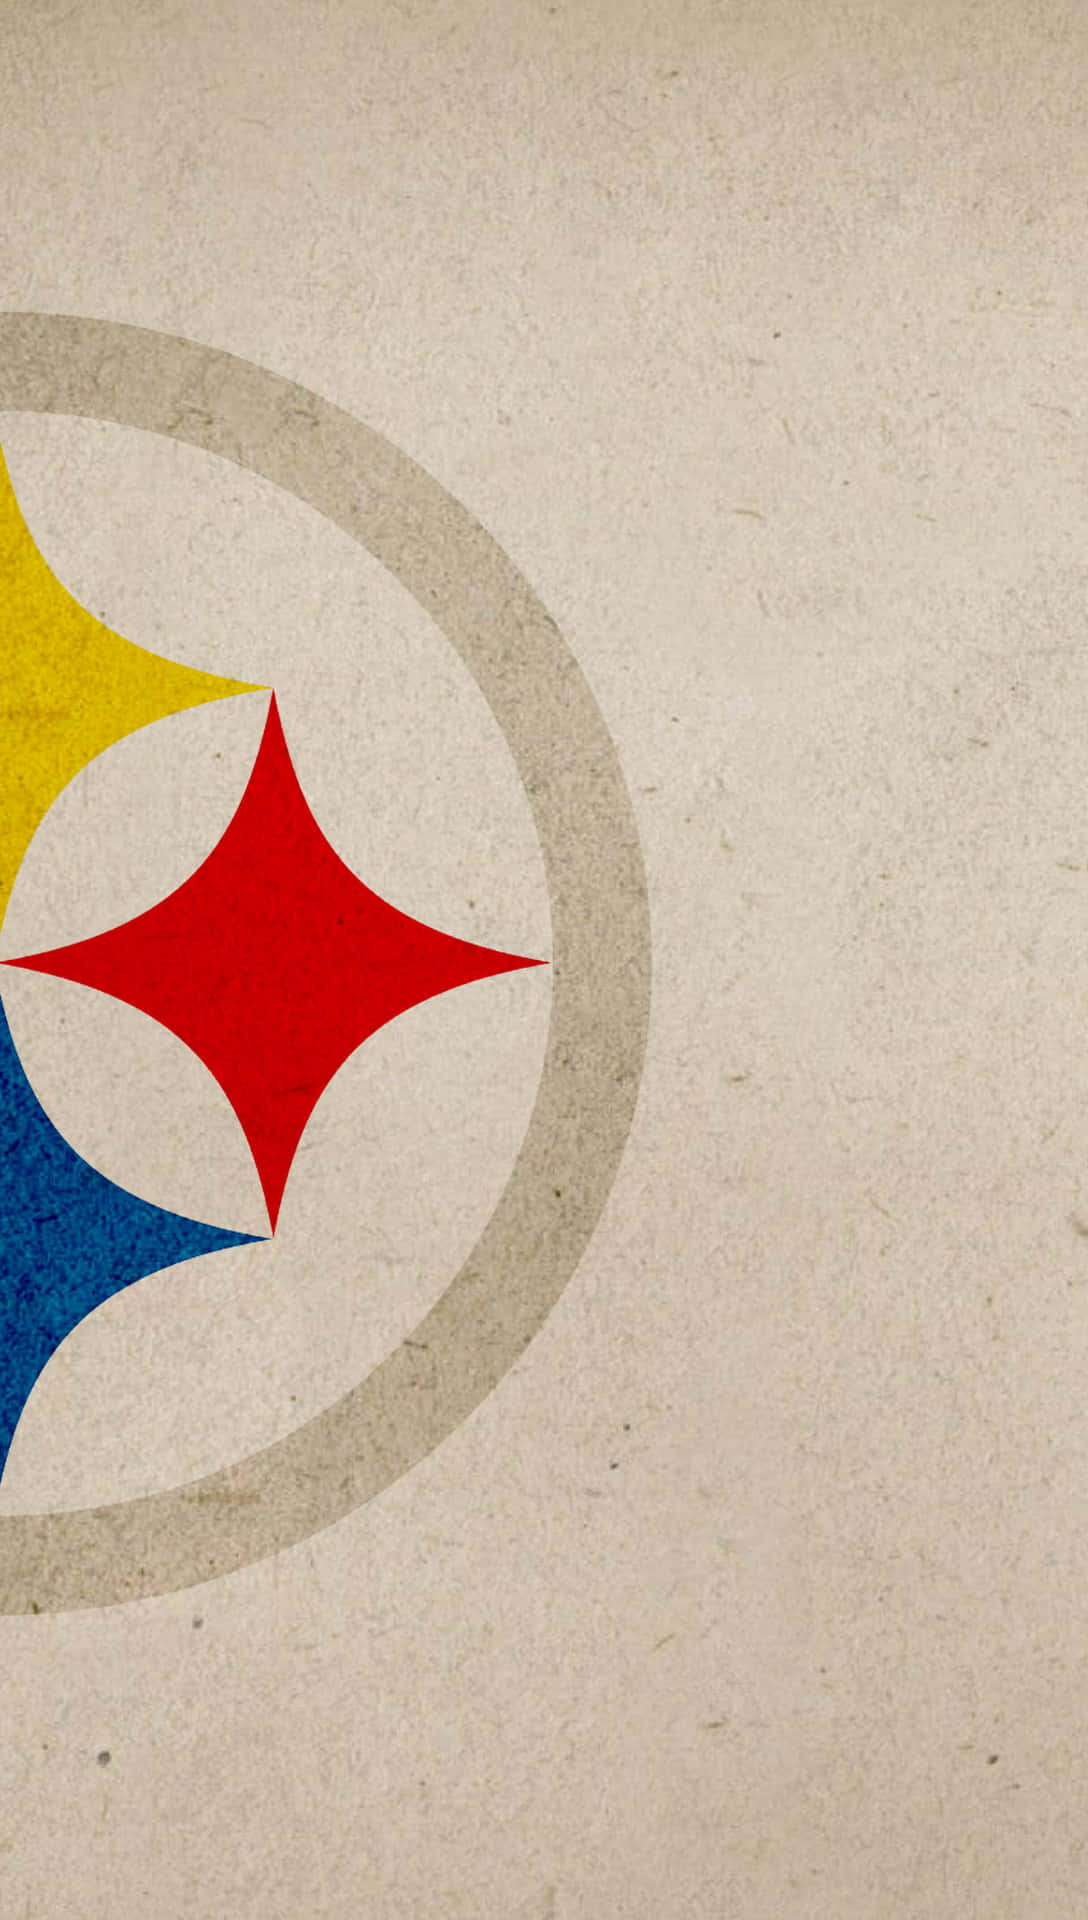 Let your team spirit ring with the Steelers Phone Wallpaper